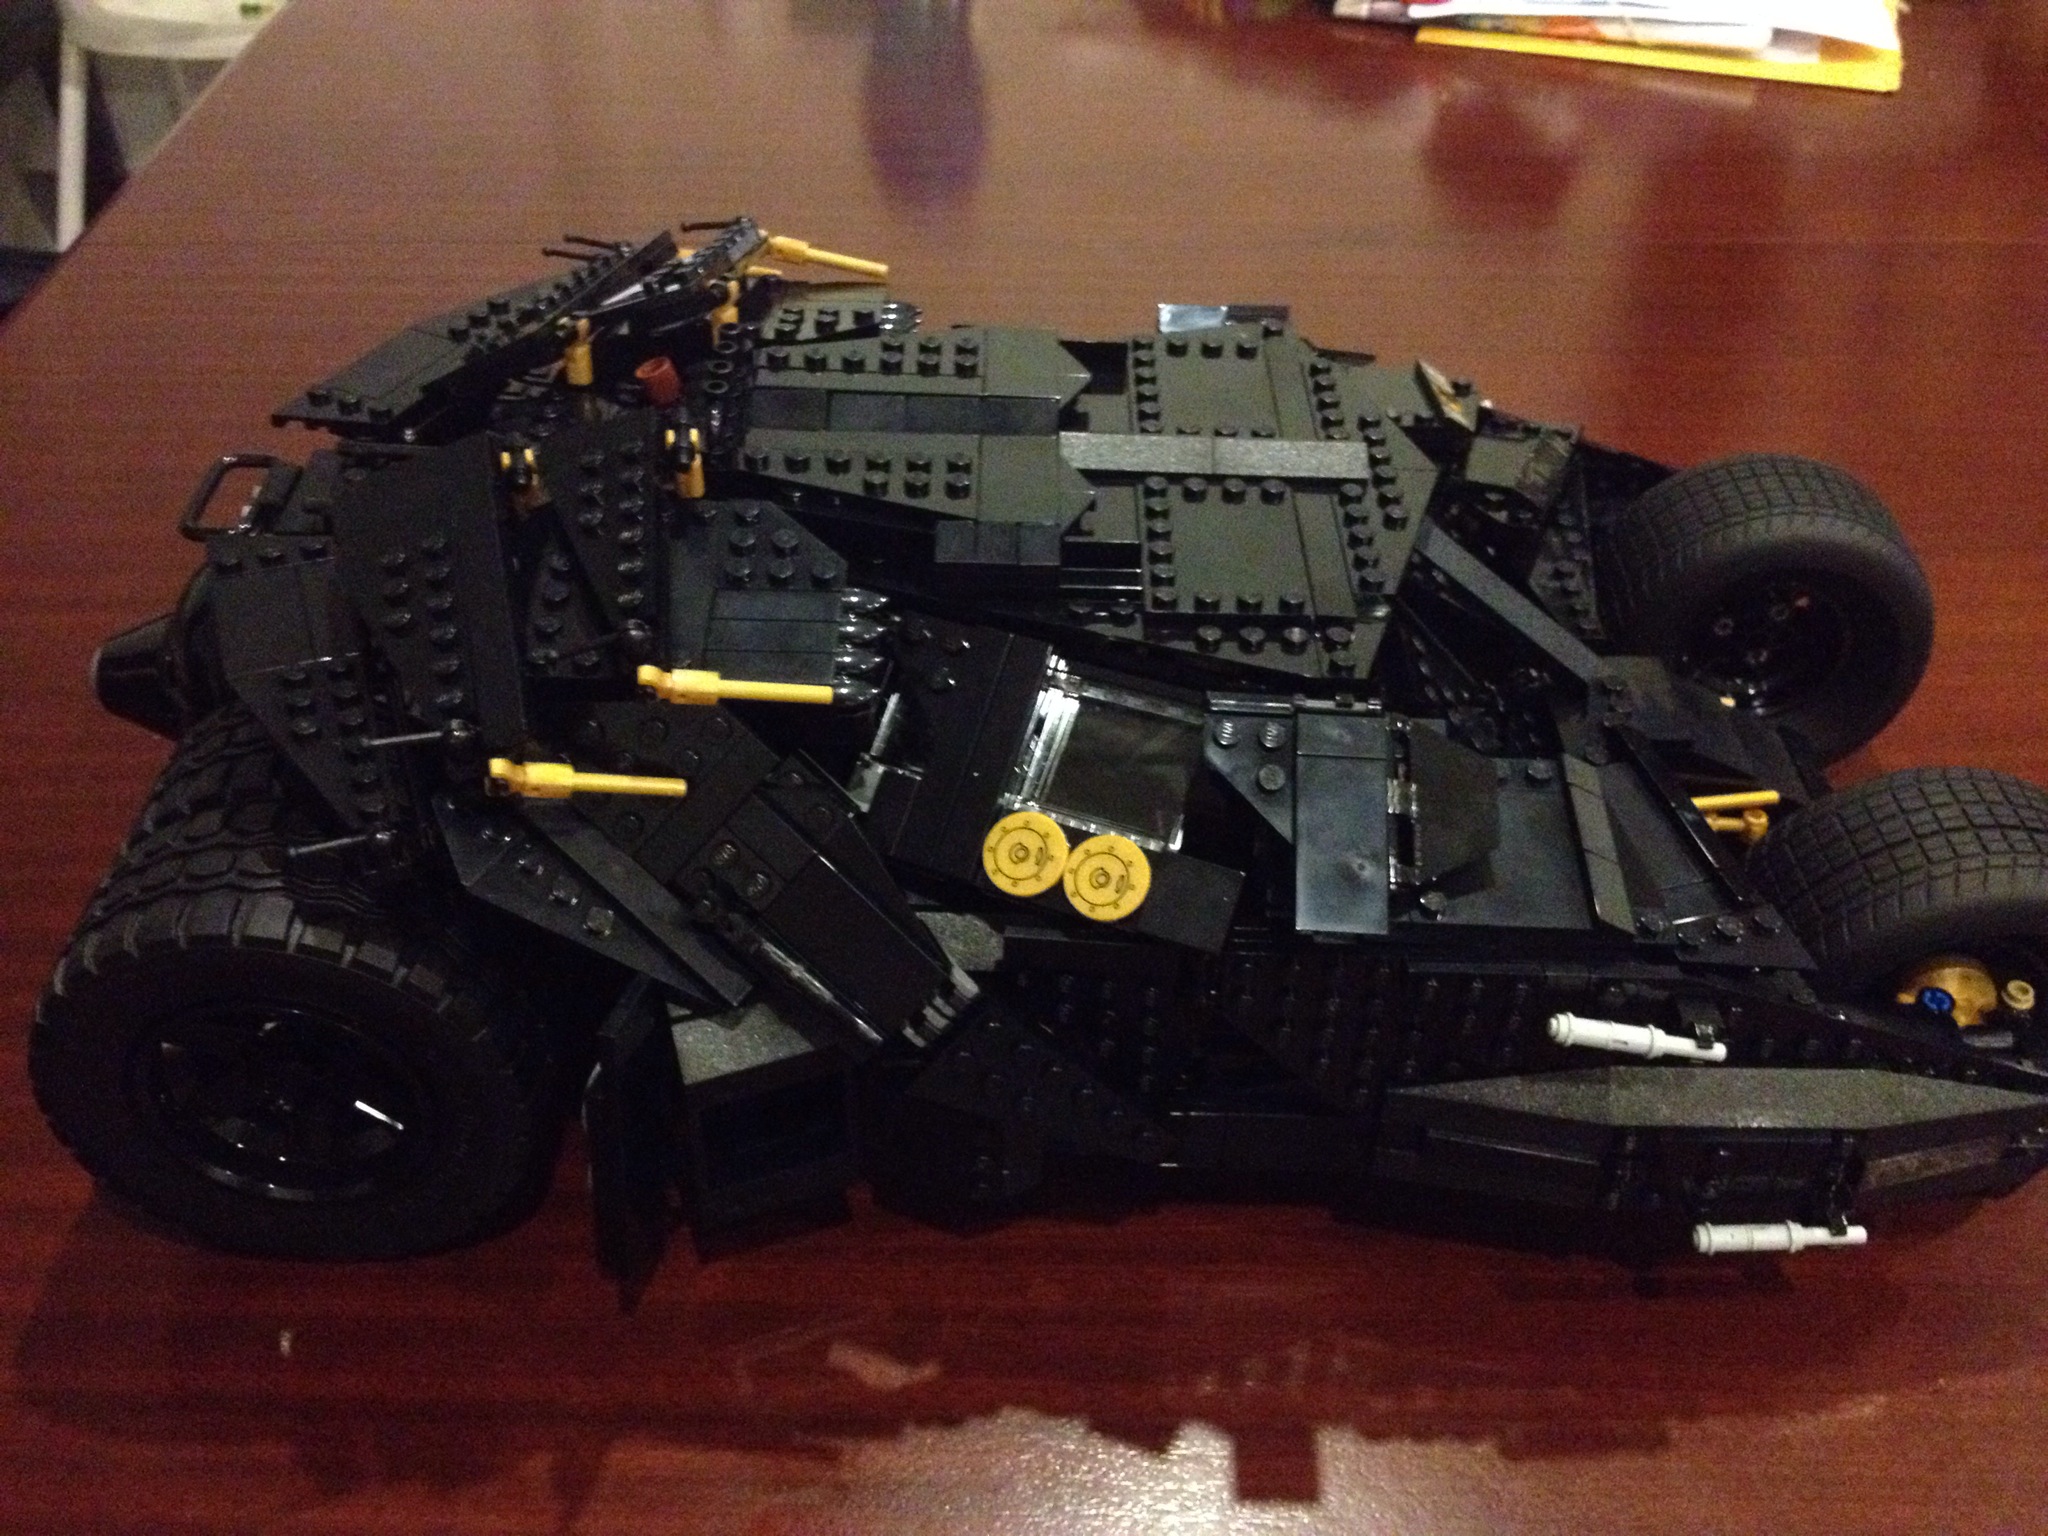 Lego's Batman Tumbler Kit Is Amazing, Has 1869 Pieces – News – Car and  Driver